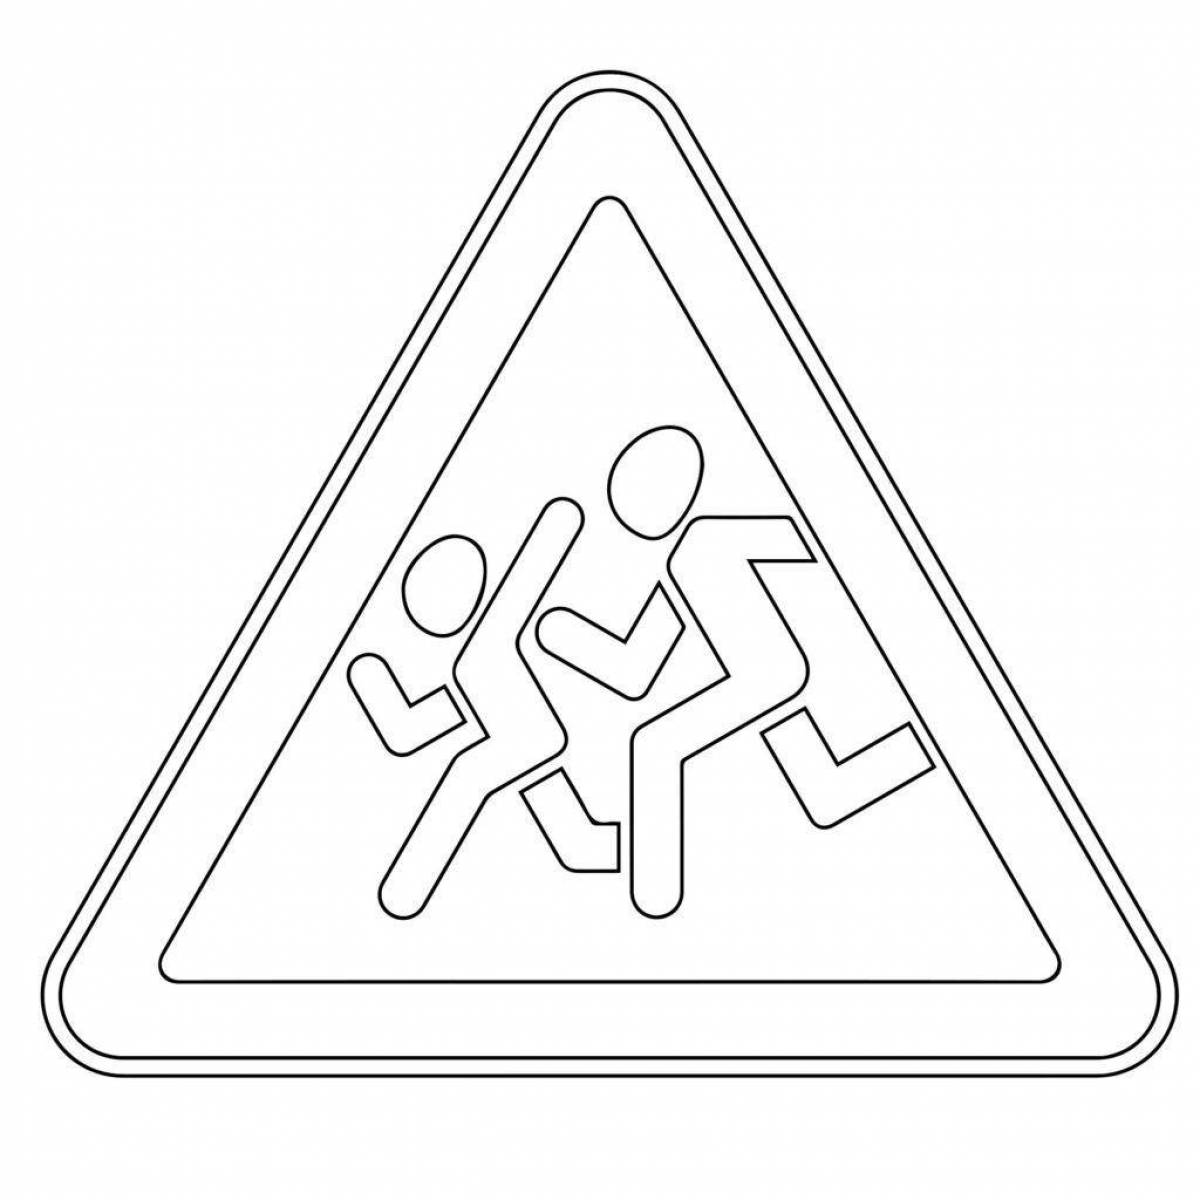 Colouring smooth beaded warning sign